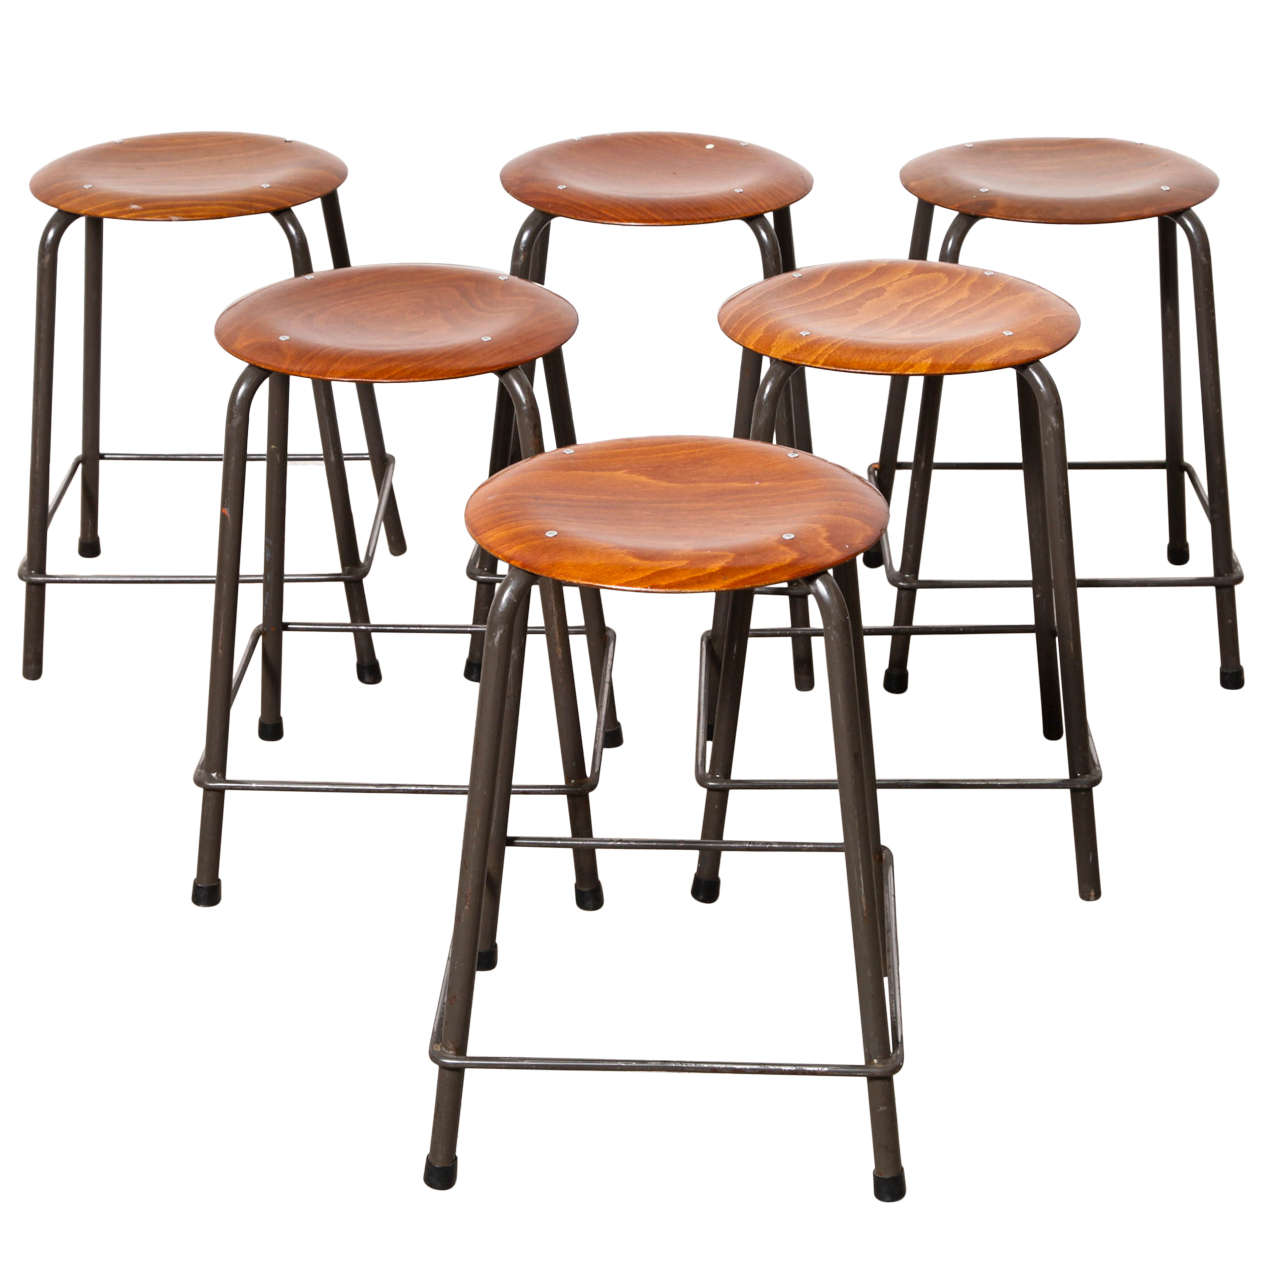 Industrial Stools from Marko